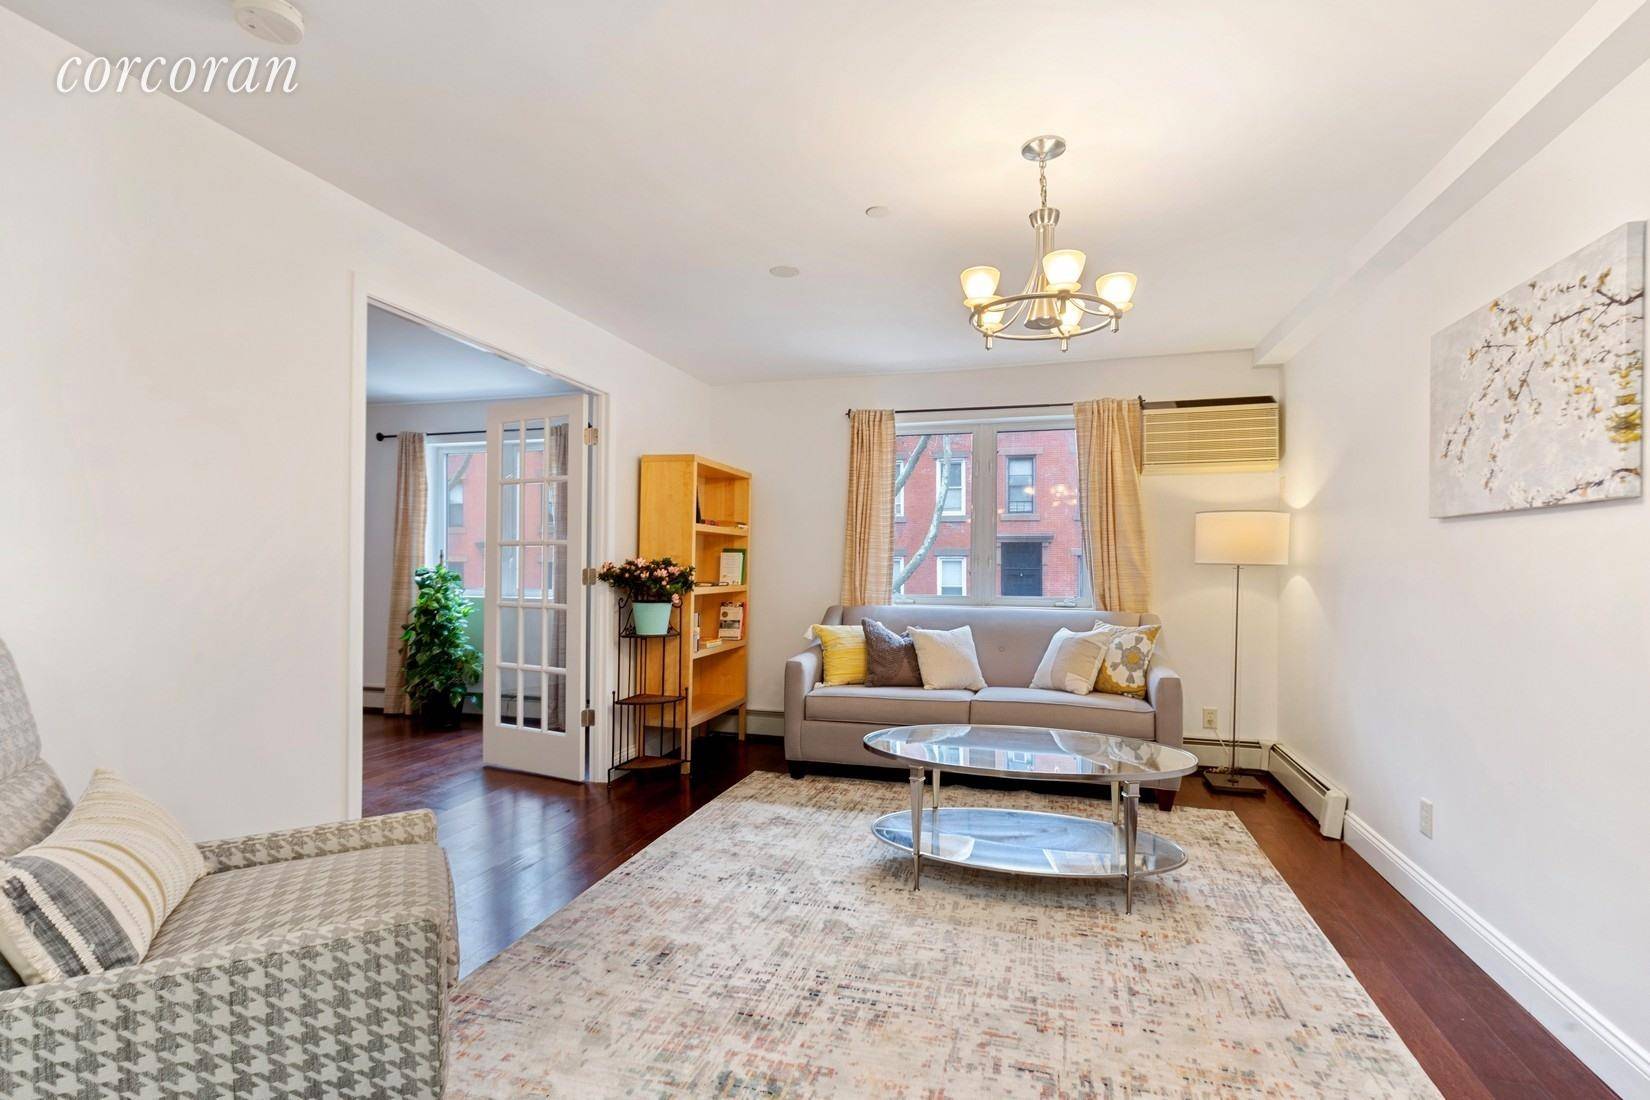 Come home to this stylish and spacious 1, 240 sqft, 3 bedroom, 2 bathroom condo located on the 2nd floor of a solid, boutique 6 unit building in Carroll Gardens.